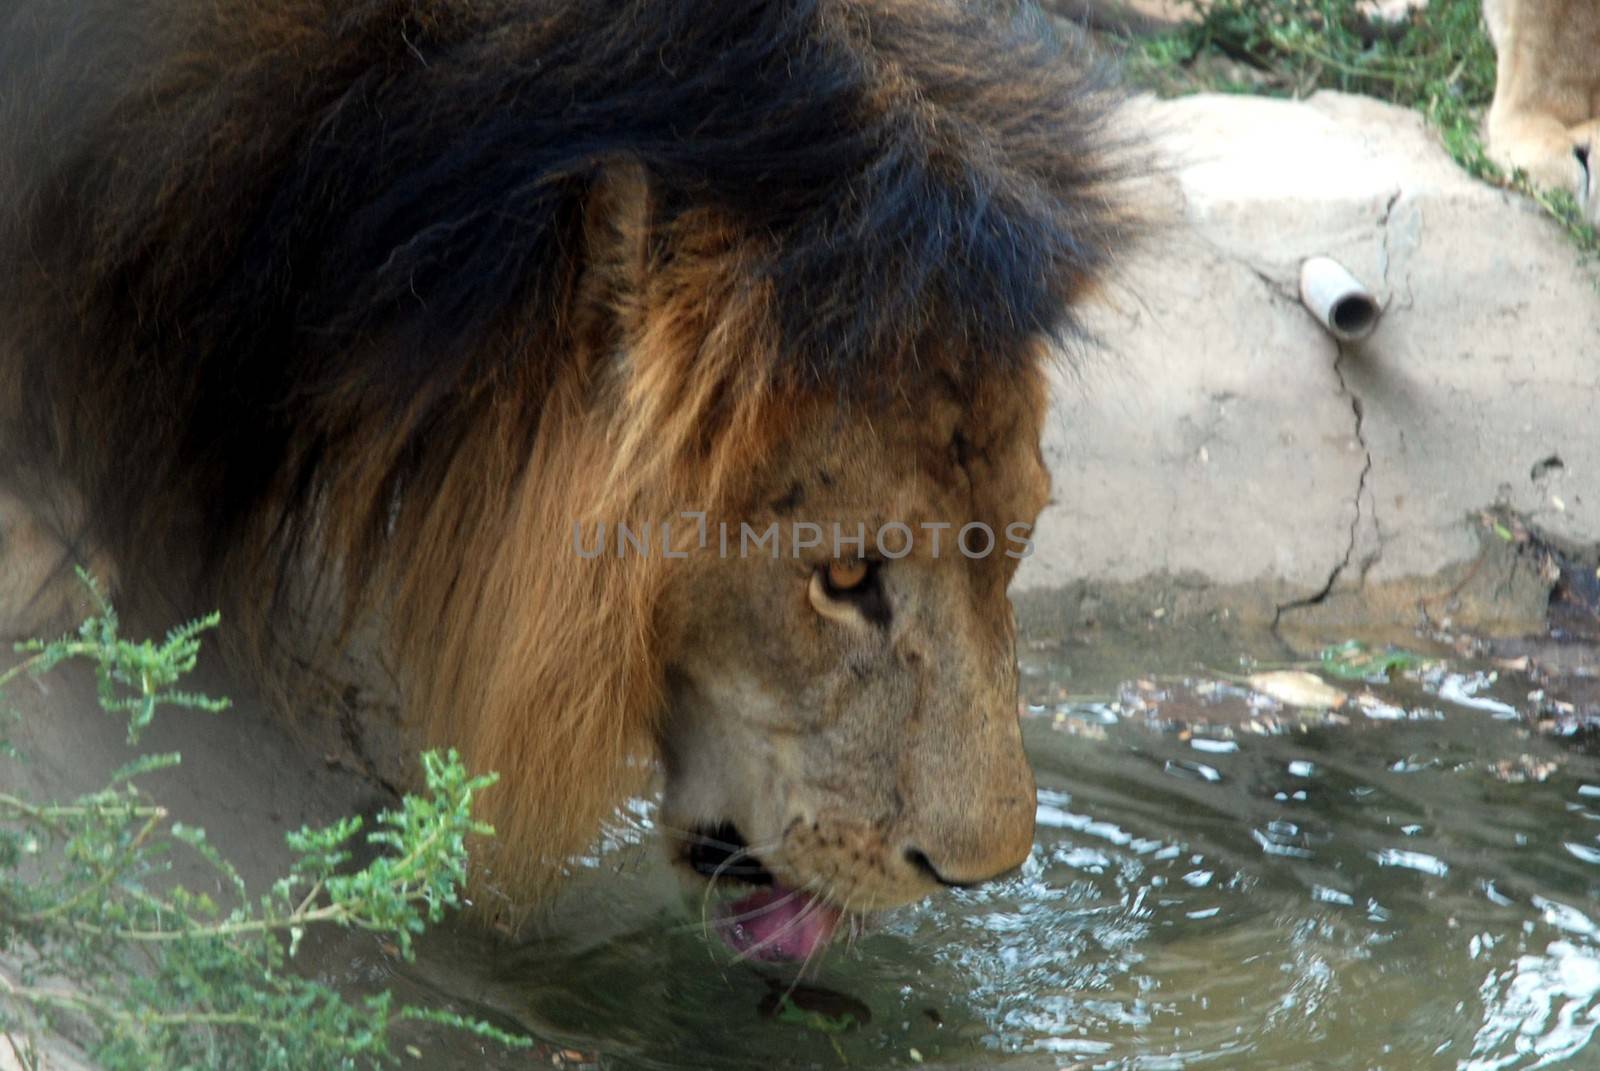 PAKISTAN, Karachi: A lion braves the scorching heat wave on September 20, 2015 by taking a sip of water at the Zoological Garden in Karachi, Pakistan.